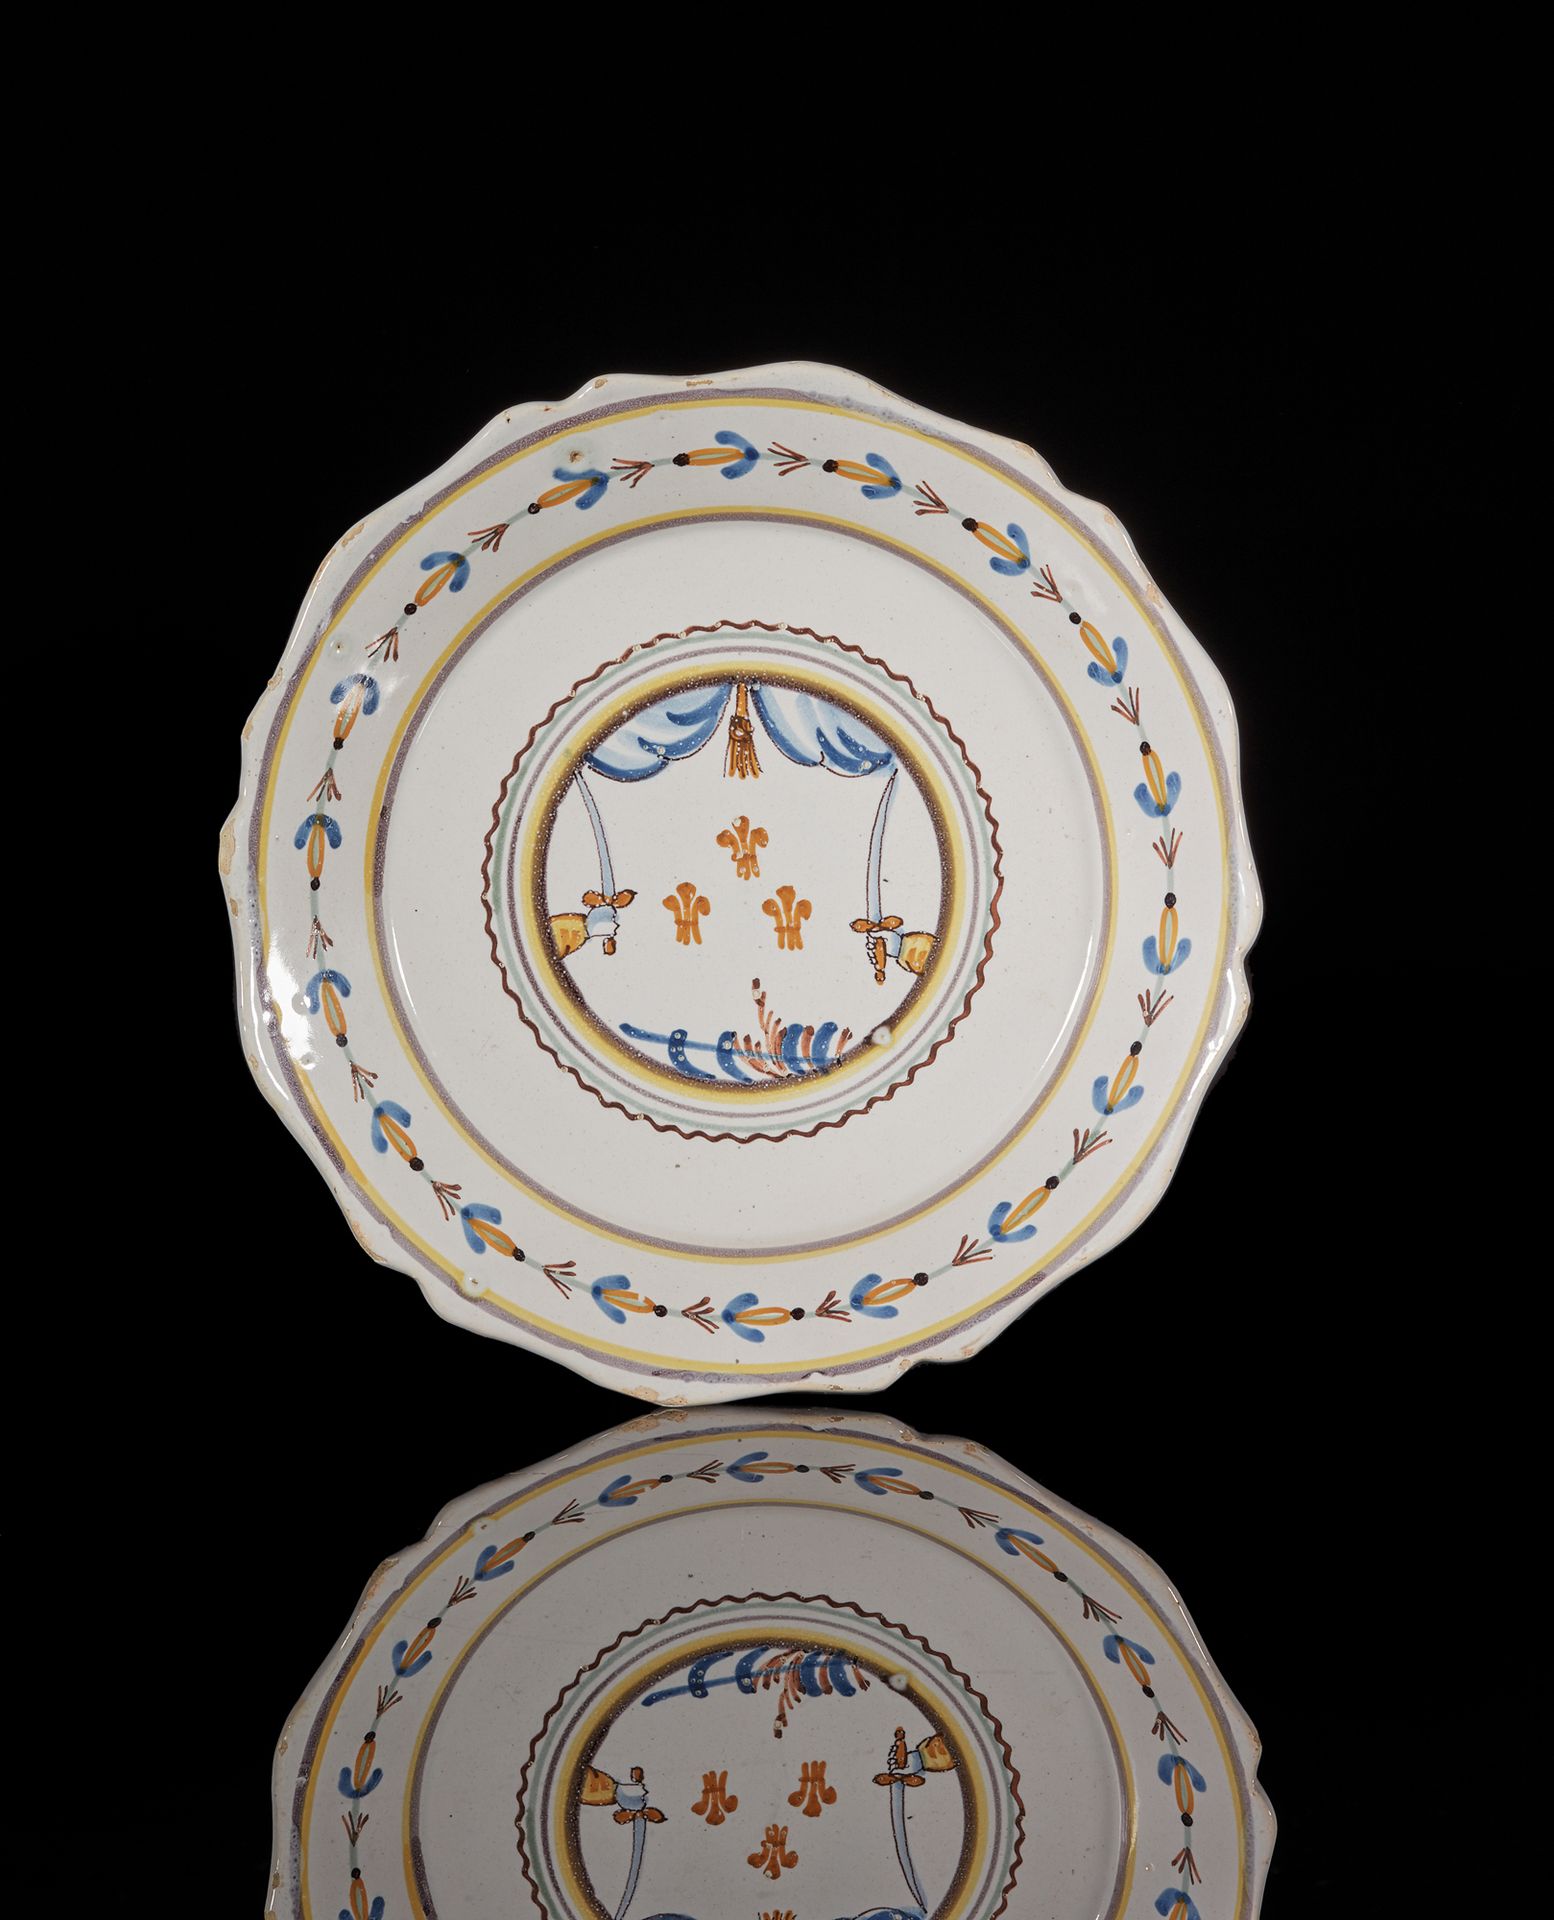 NEVERS An earthenware contourné plate with polychrome counter-revolutionary deco&hellip;